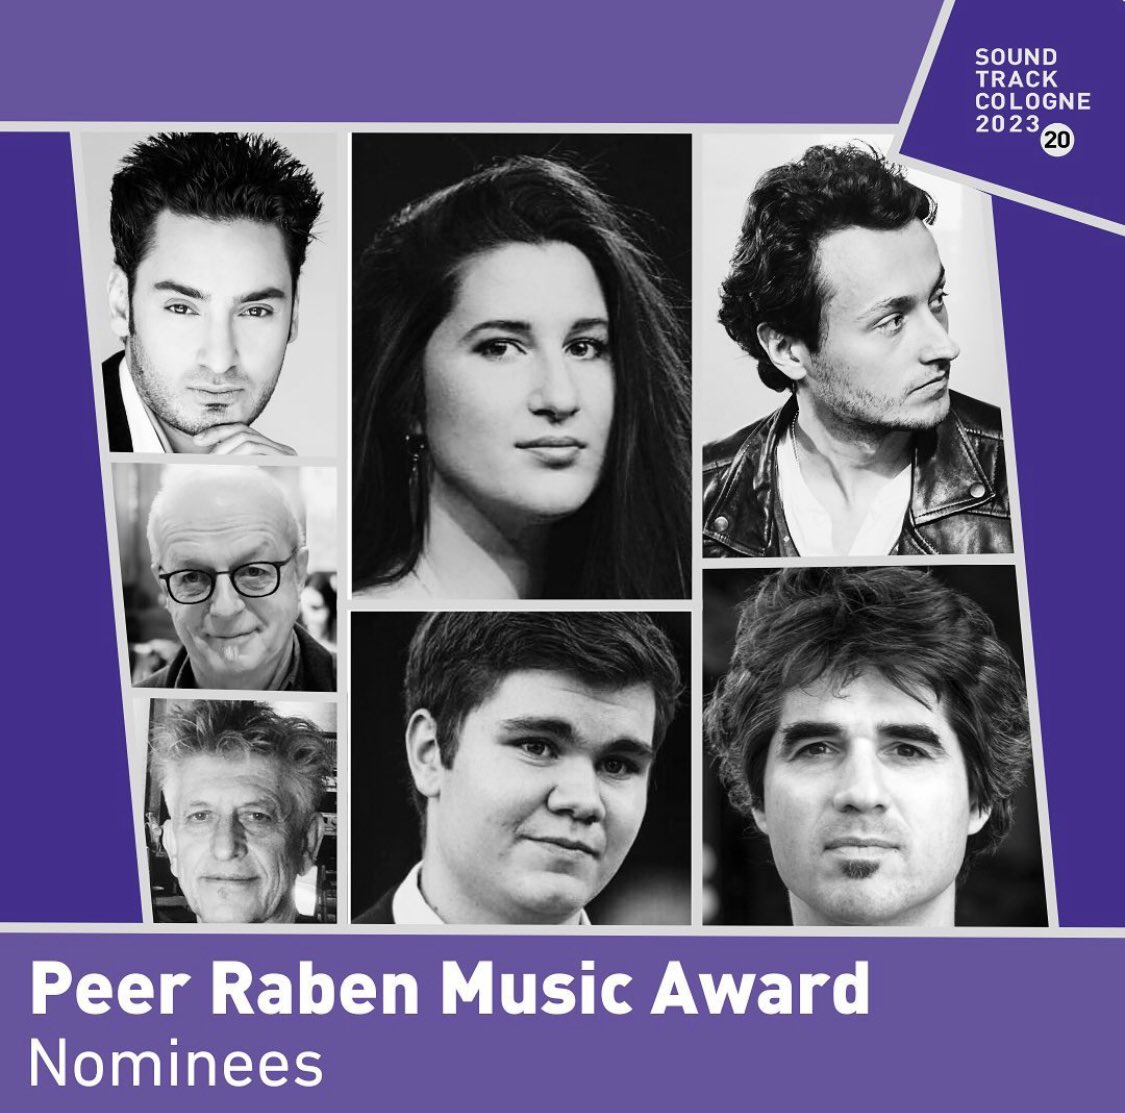 Very excited that The Last Cloudweaver has been nominated for the Peer Raben Music Award at @SoundTrack_C I very much look forward to the film’s German premiere and the award ceremony on June 23rd! Find out more here: soundtrackcologne.de #soundtrackcologne #filmmusic